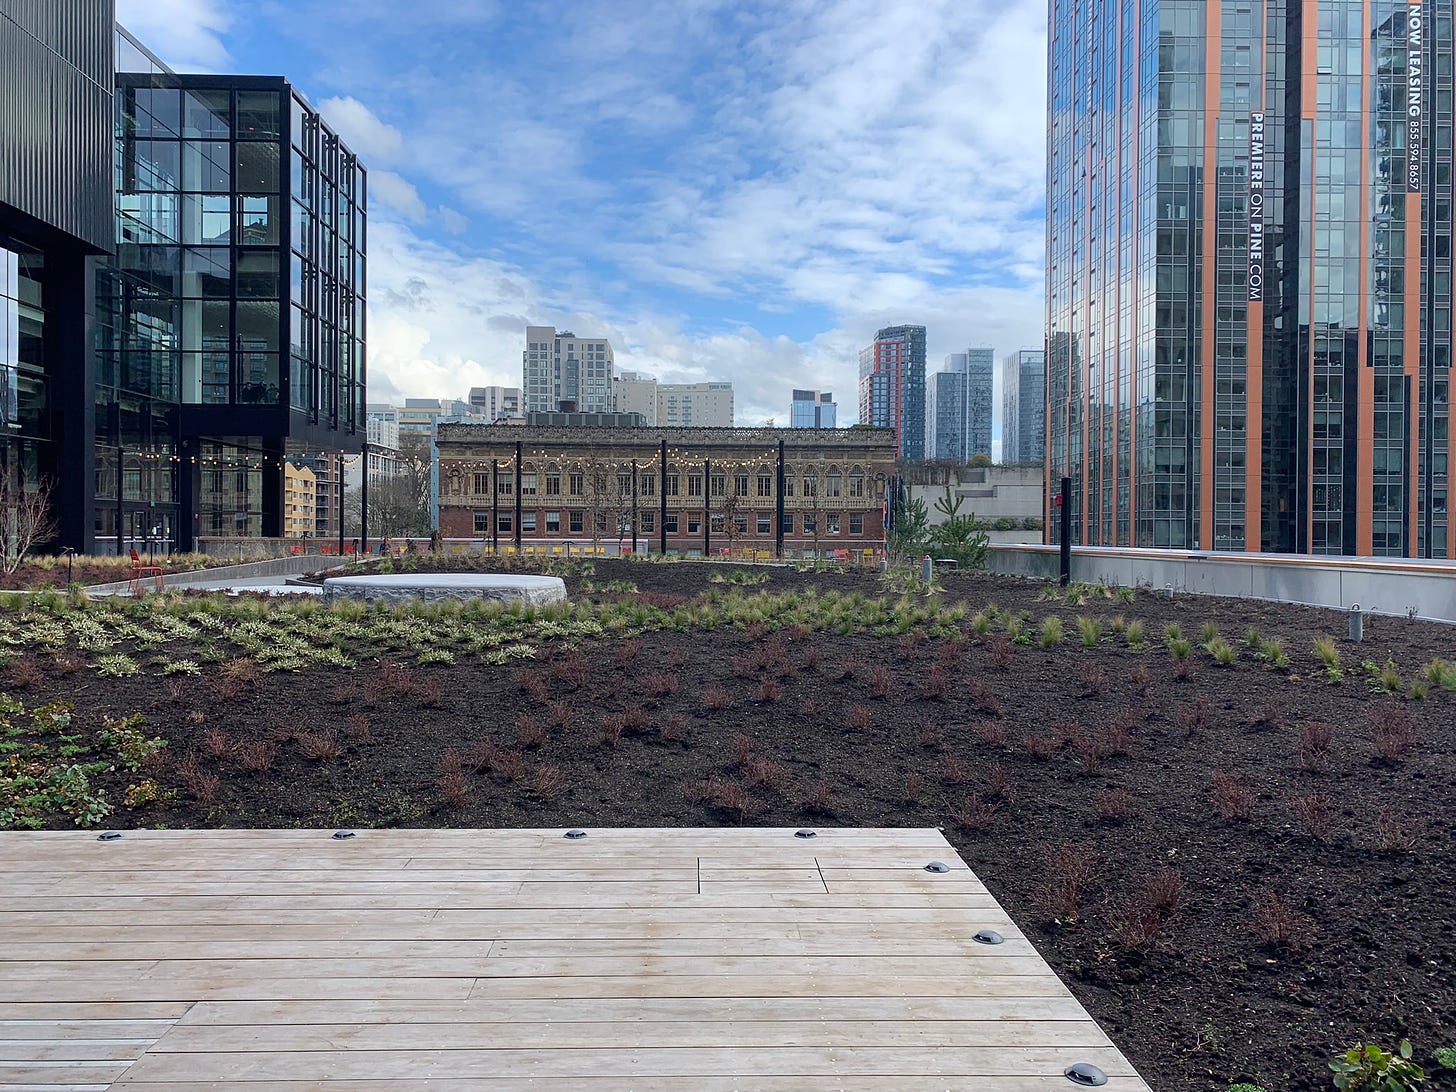 View of greenery and buildings from outdoor terrace in Seattle